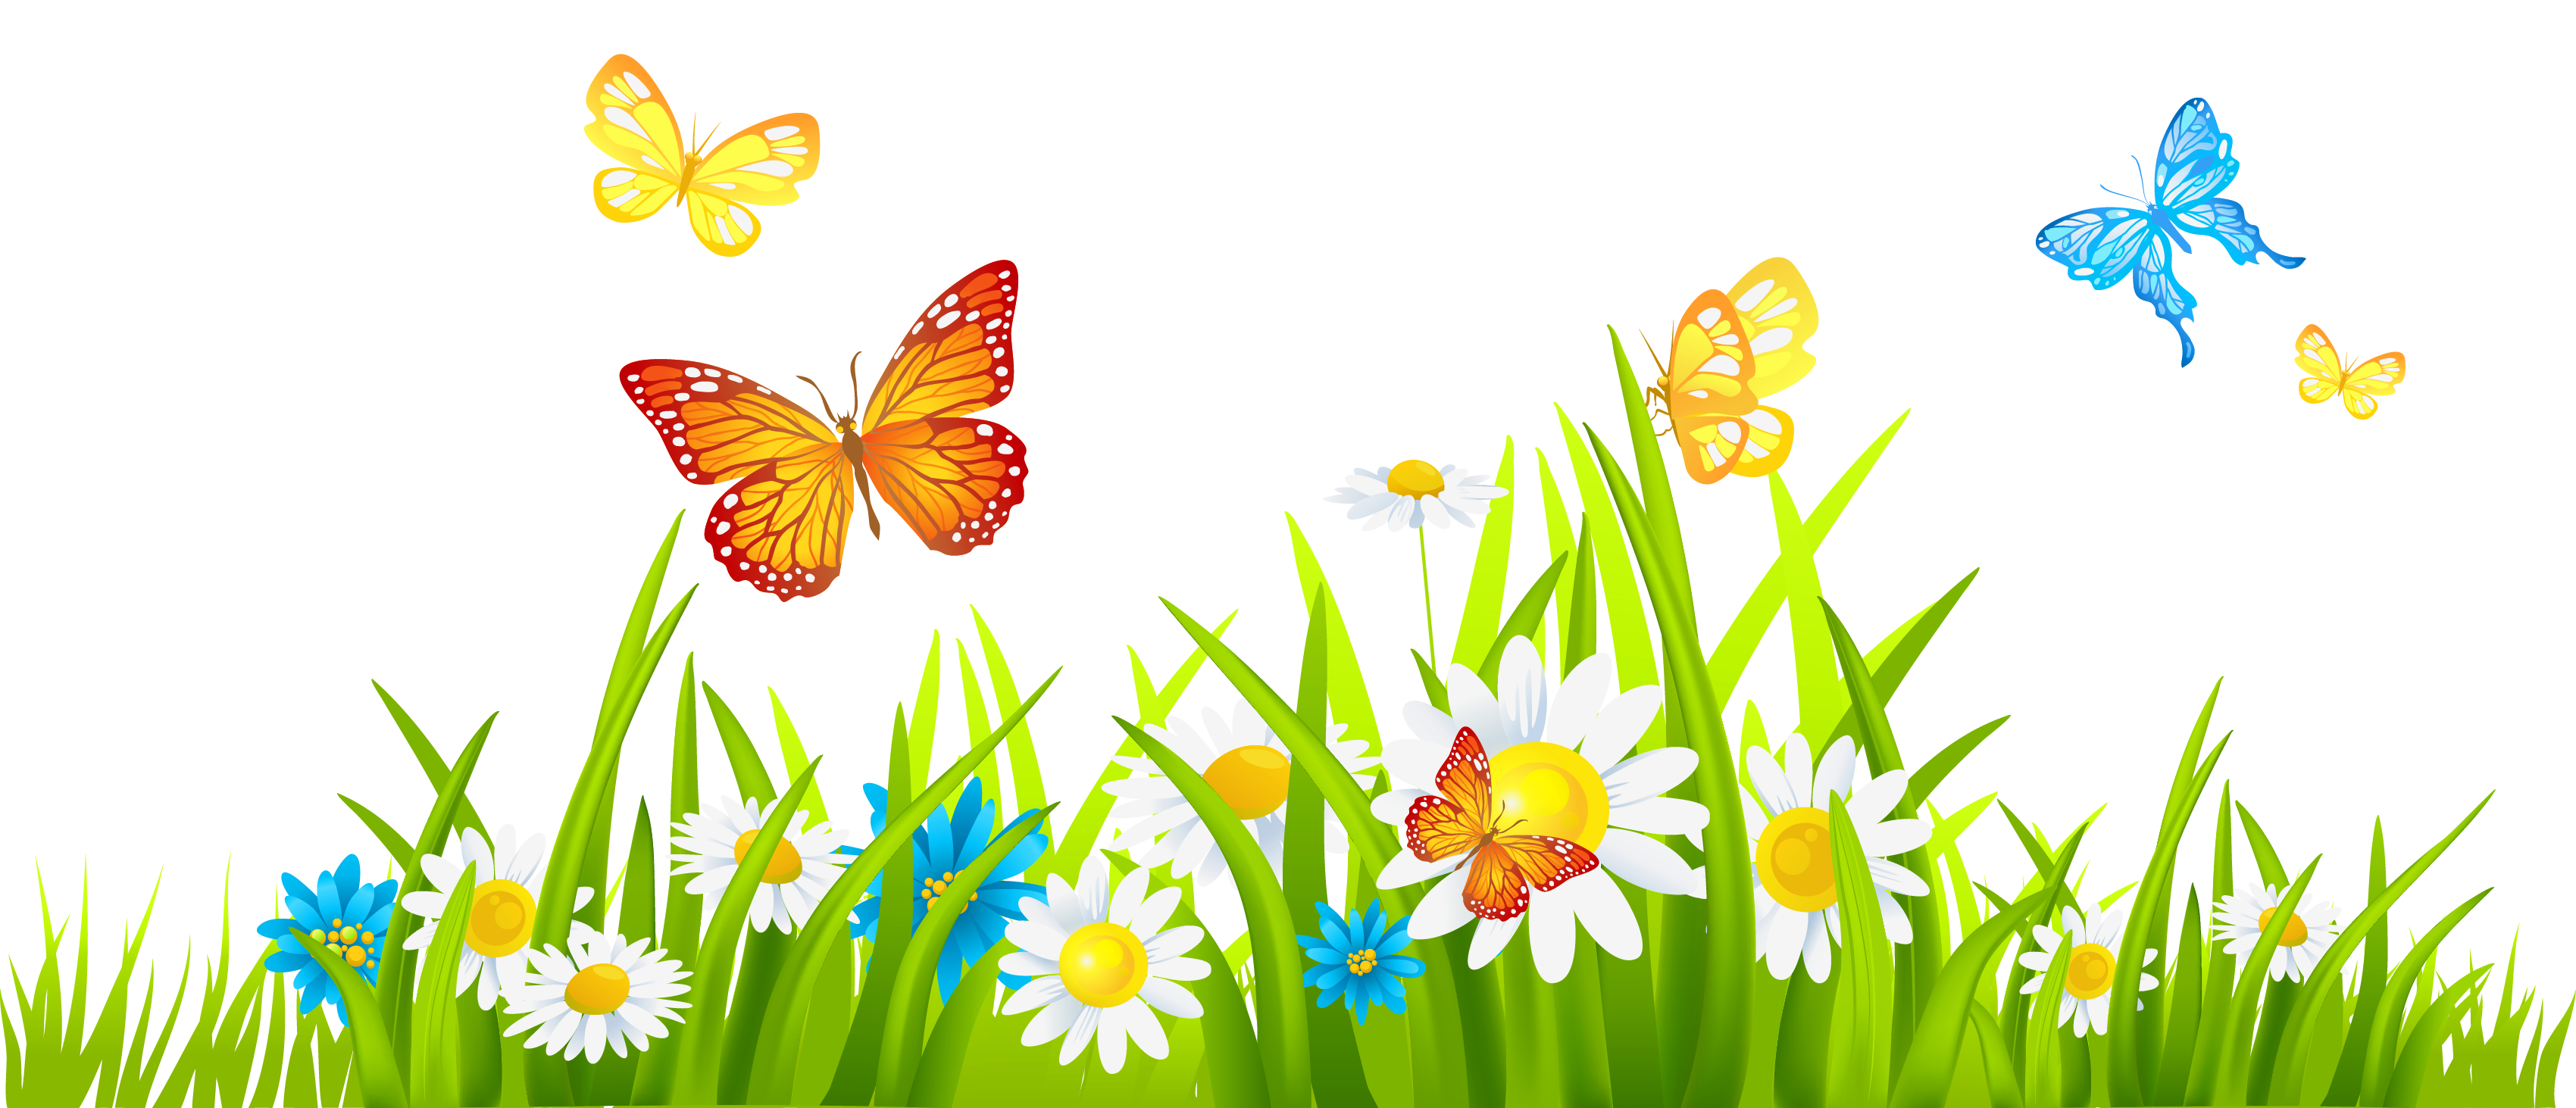 Grass Ground with Flowers and Butterflies PNG Clipart